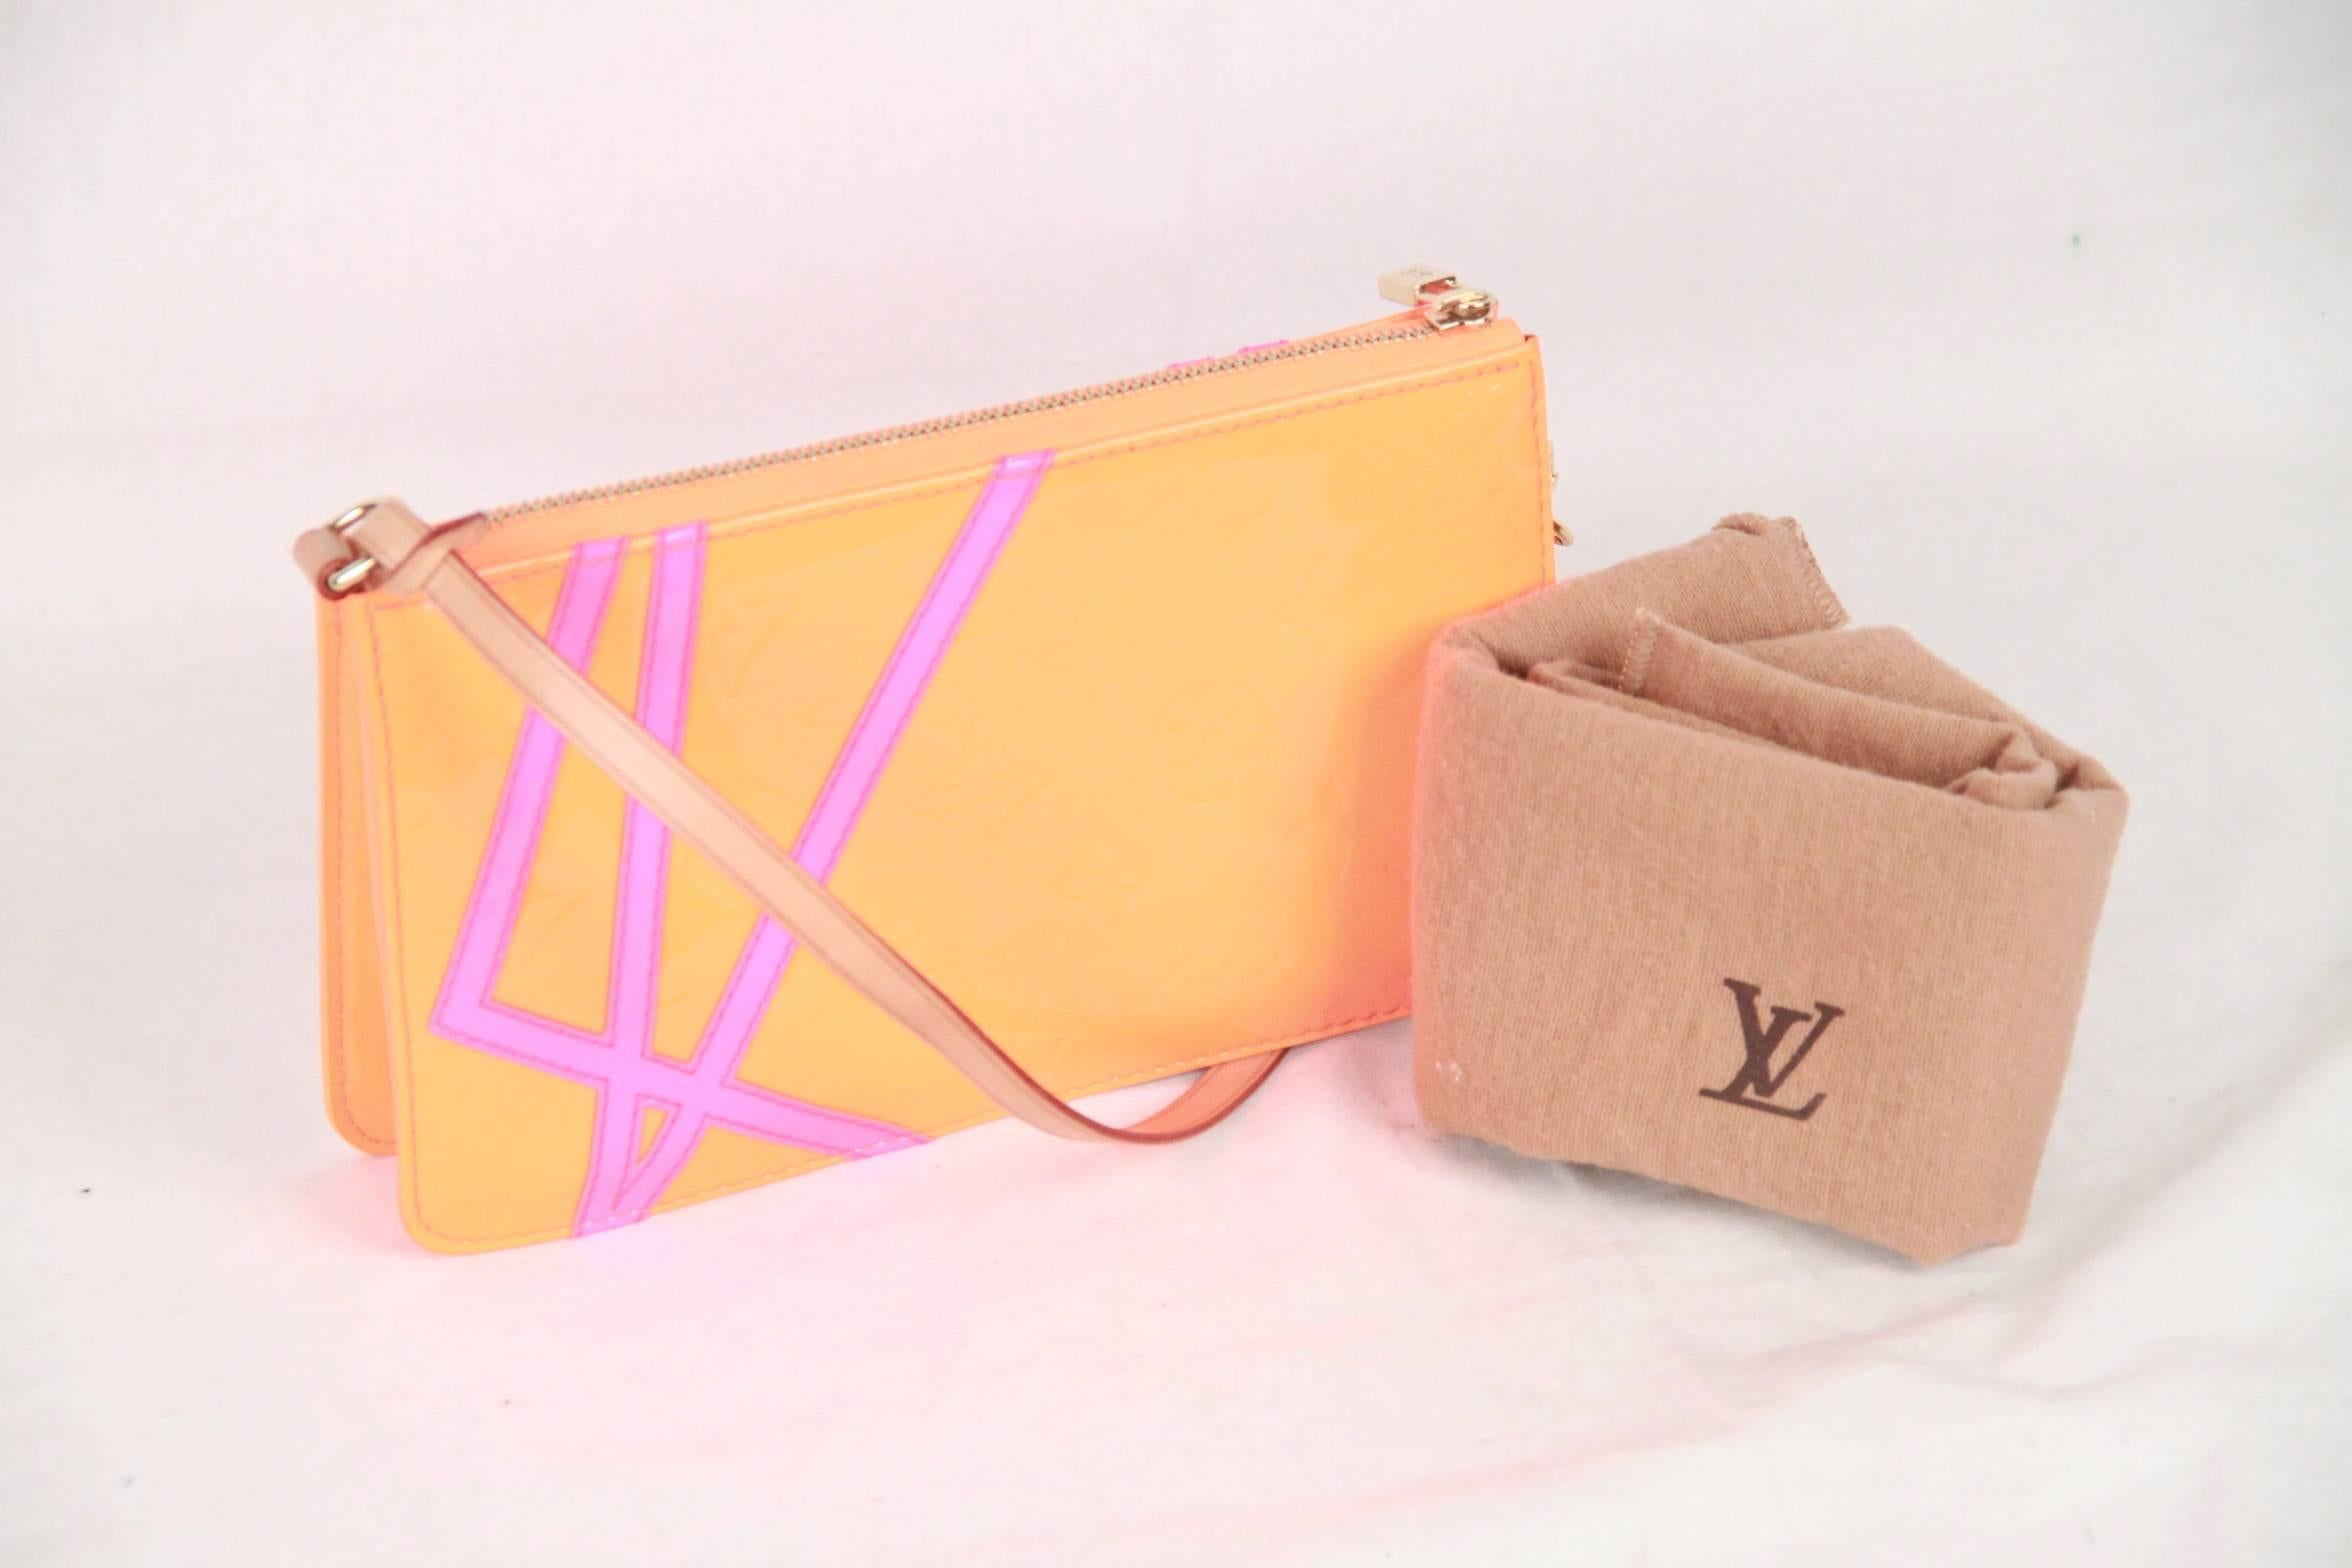 In 2002, Louis Vuitton collaborated with American artist and director Robert Wilson to create a visually striking line of bags in Fluo (fluorescent) Monogram Vernis colors. This is a limited edition LEXINGTON POCHETTE in fluorescent orange Monogram